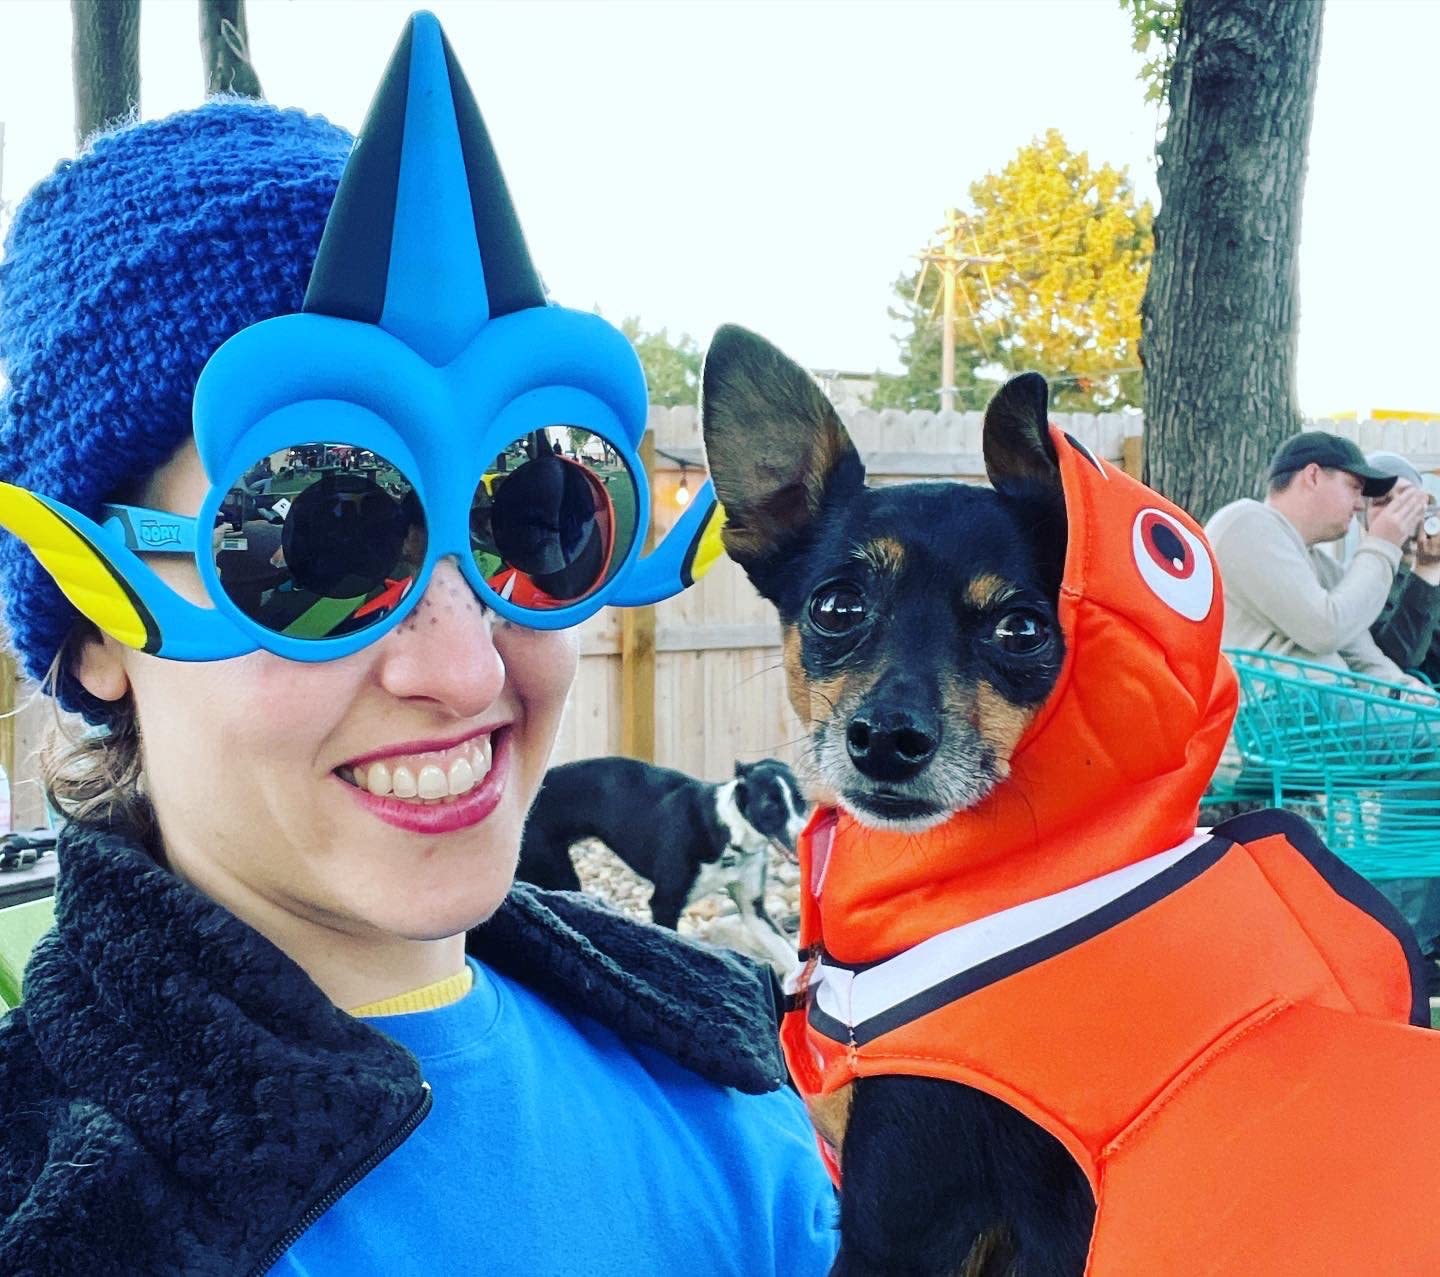 Disney Dog and Owner Costumes Finding Nemo